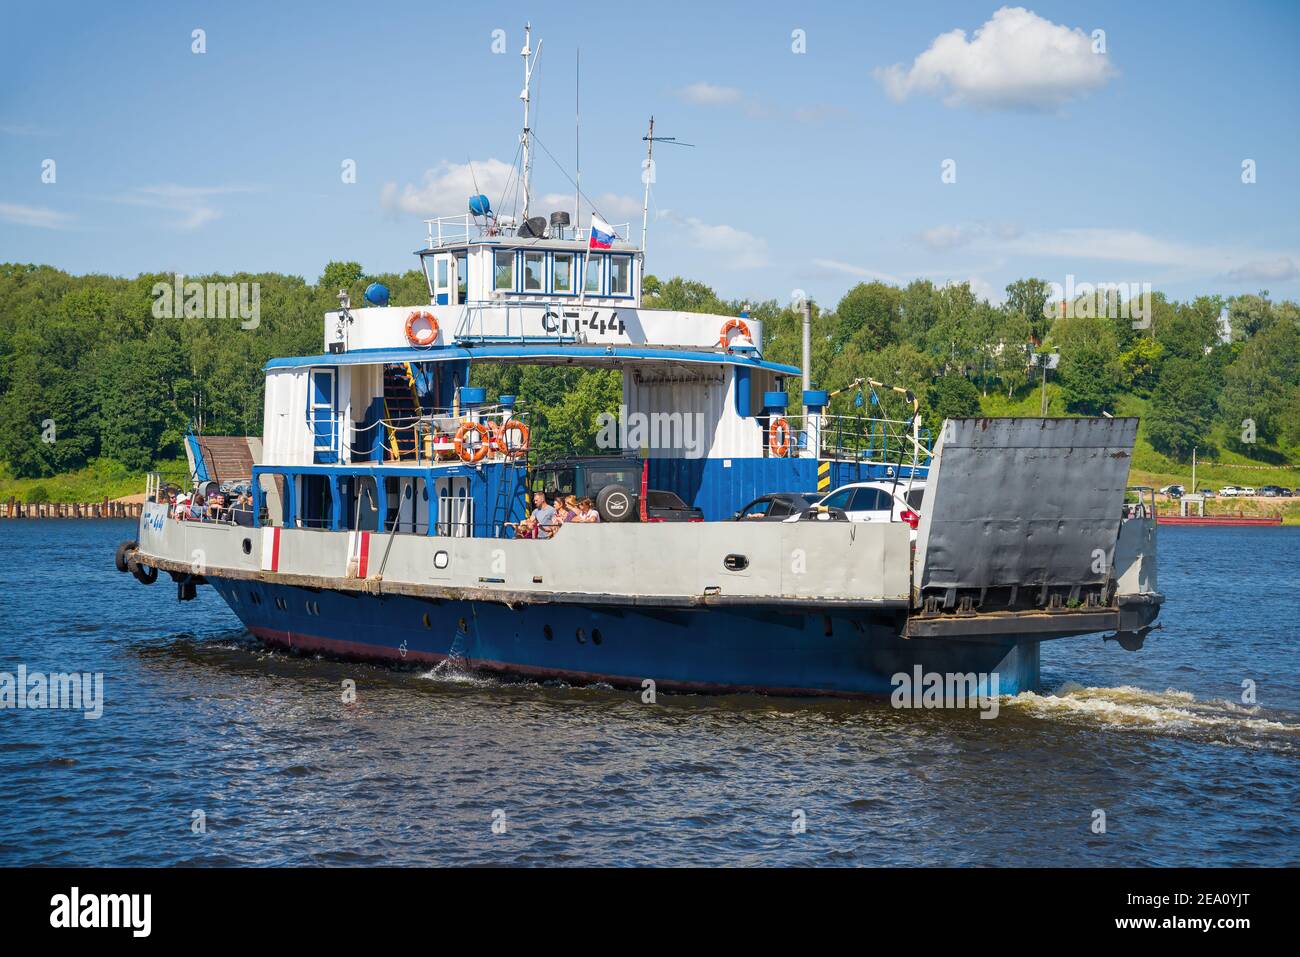 TUTAEV, RUSSIA - JULY 14, 2016: Self-propelled cargo-passenger river ferry 'SP-44' on the Volga river close-up Stock Photo